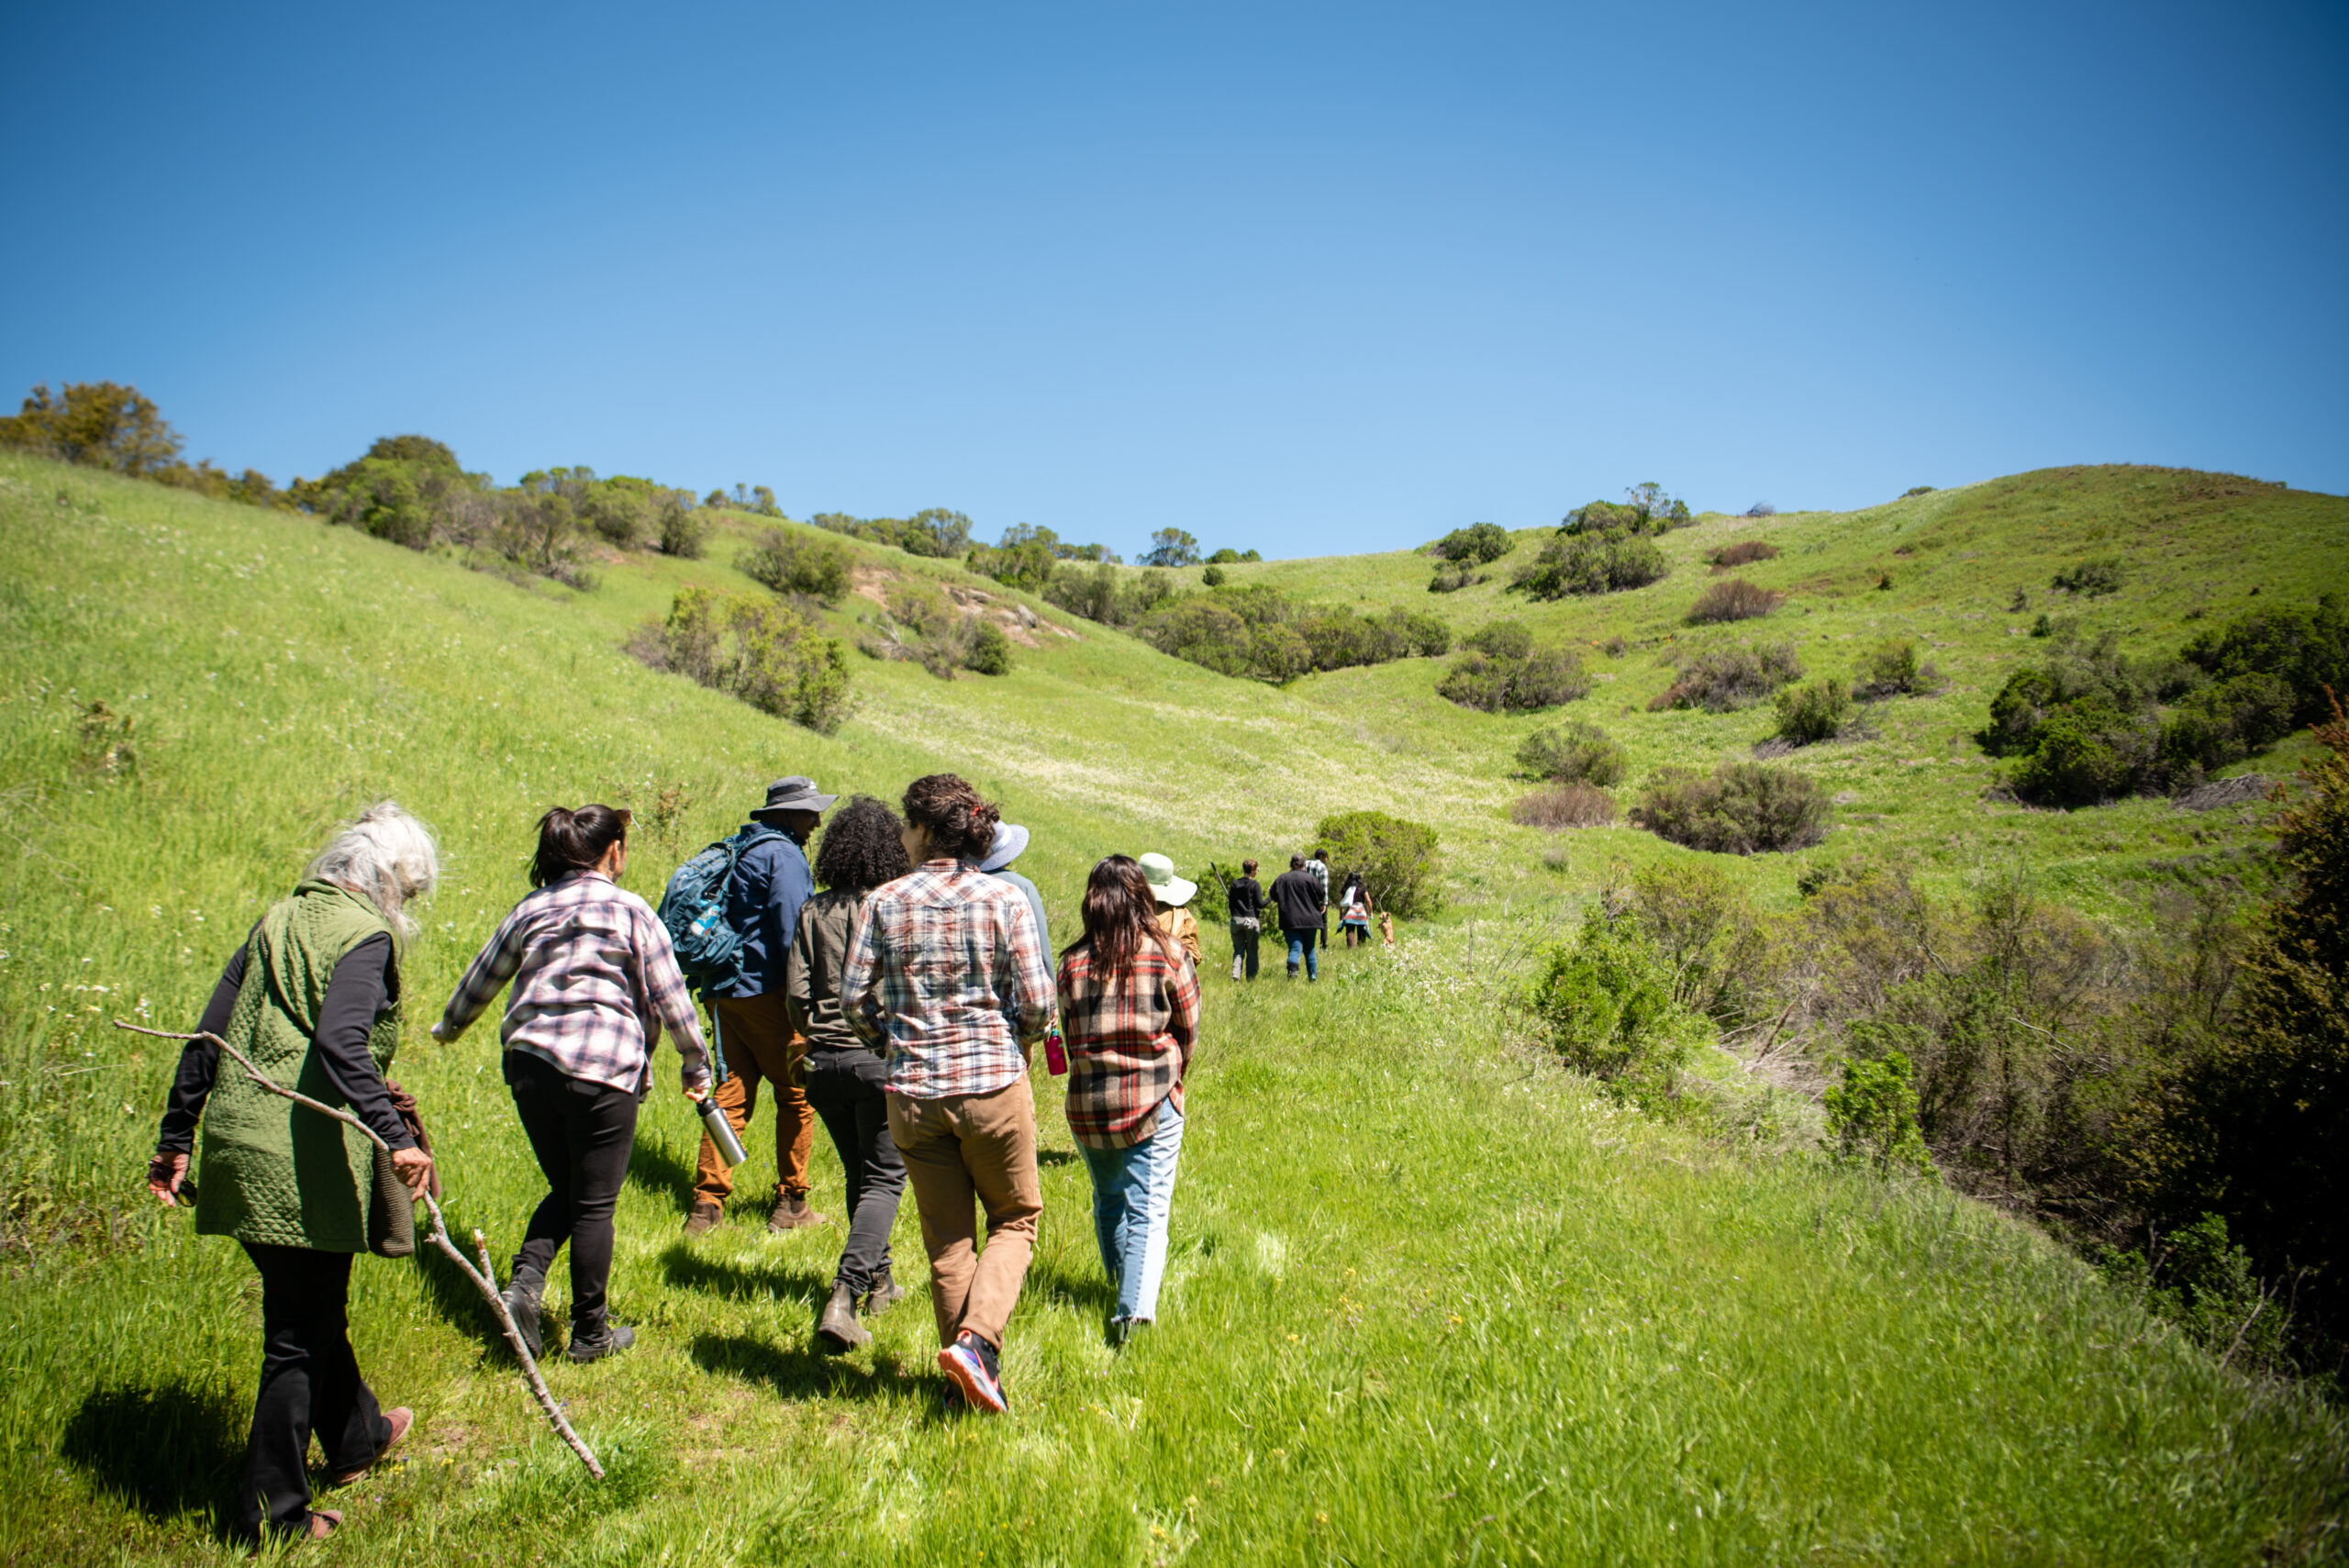 A landscape photo of a grassy green hill against a blue sky.  A group of people walk  on the hill with their backs to the camera. Photo credit: Brooke Anderson / @movementphotographer.